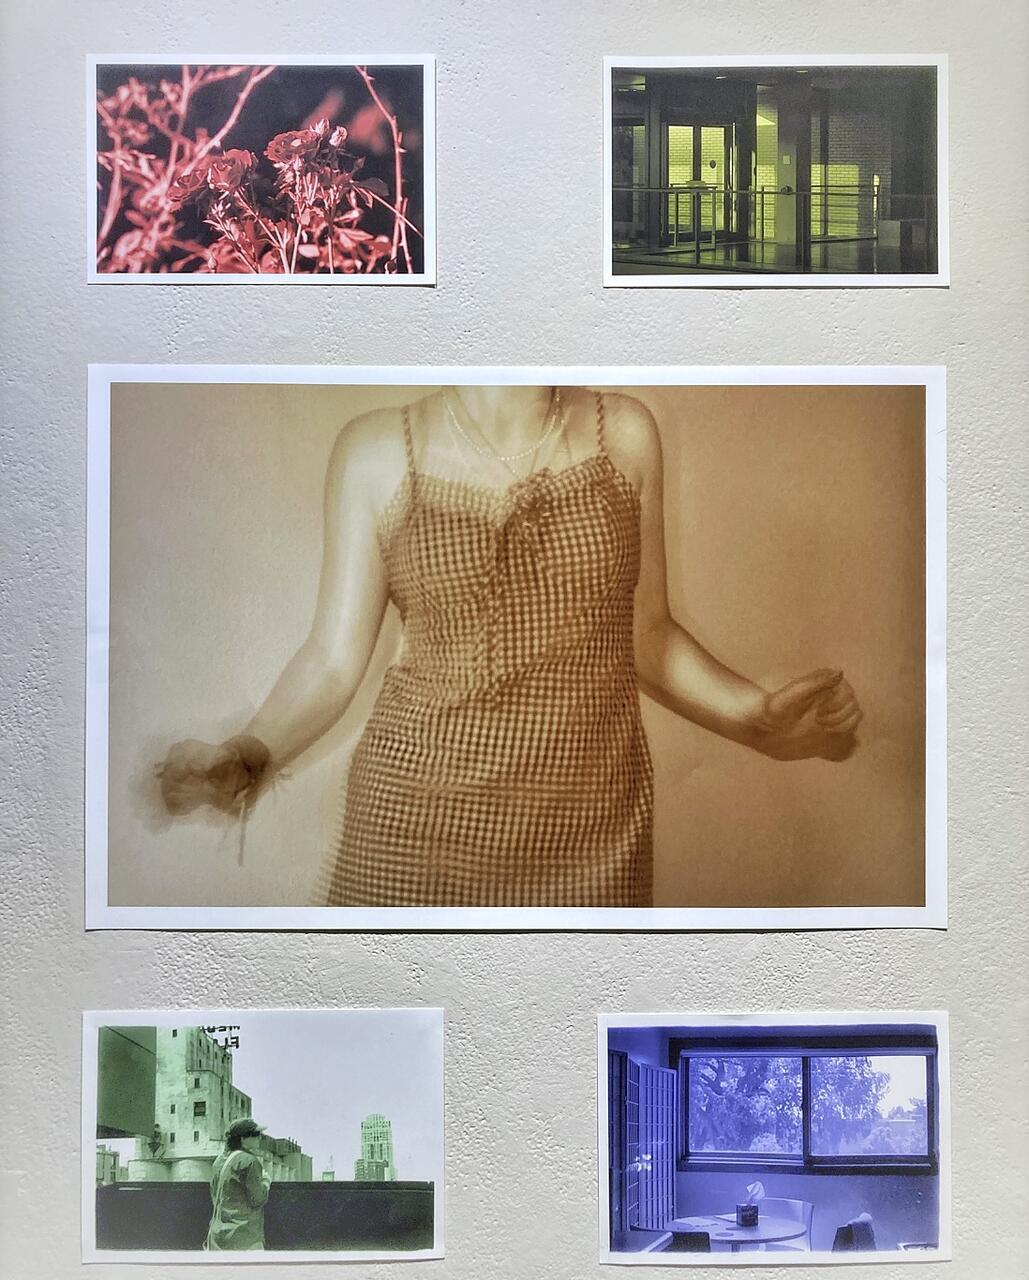 5 color photographs. Central image shows the torso and arms of a woman and is in sepia tones. Clockwise from top left shows a plant in red tones, the interior of MCAD in yellow/green tones, a student at Gold Medal Park in green tones, and the interior of a dorm room in blue tones.